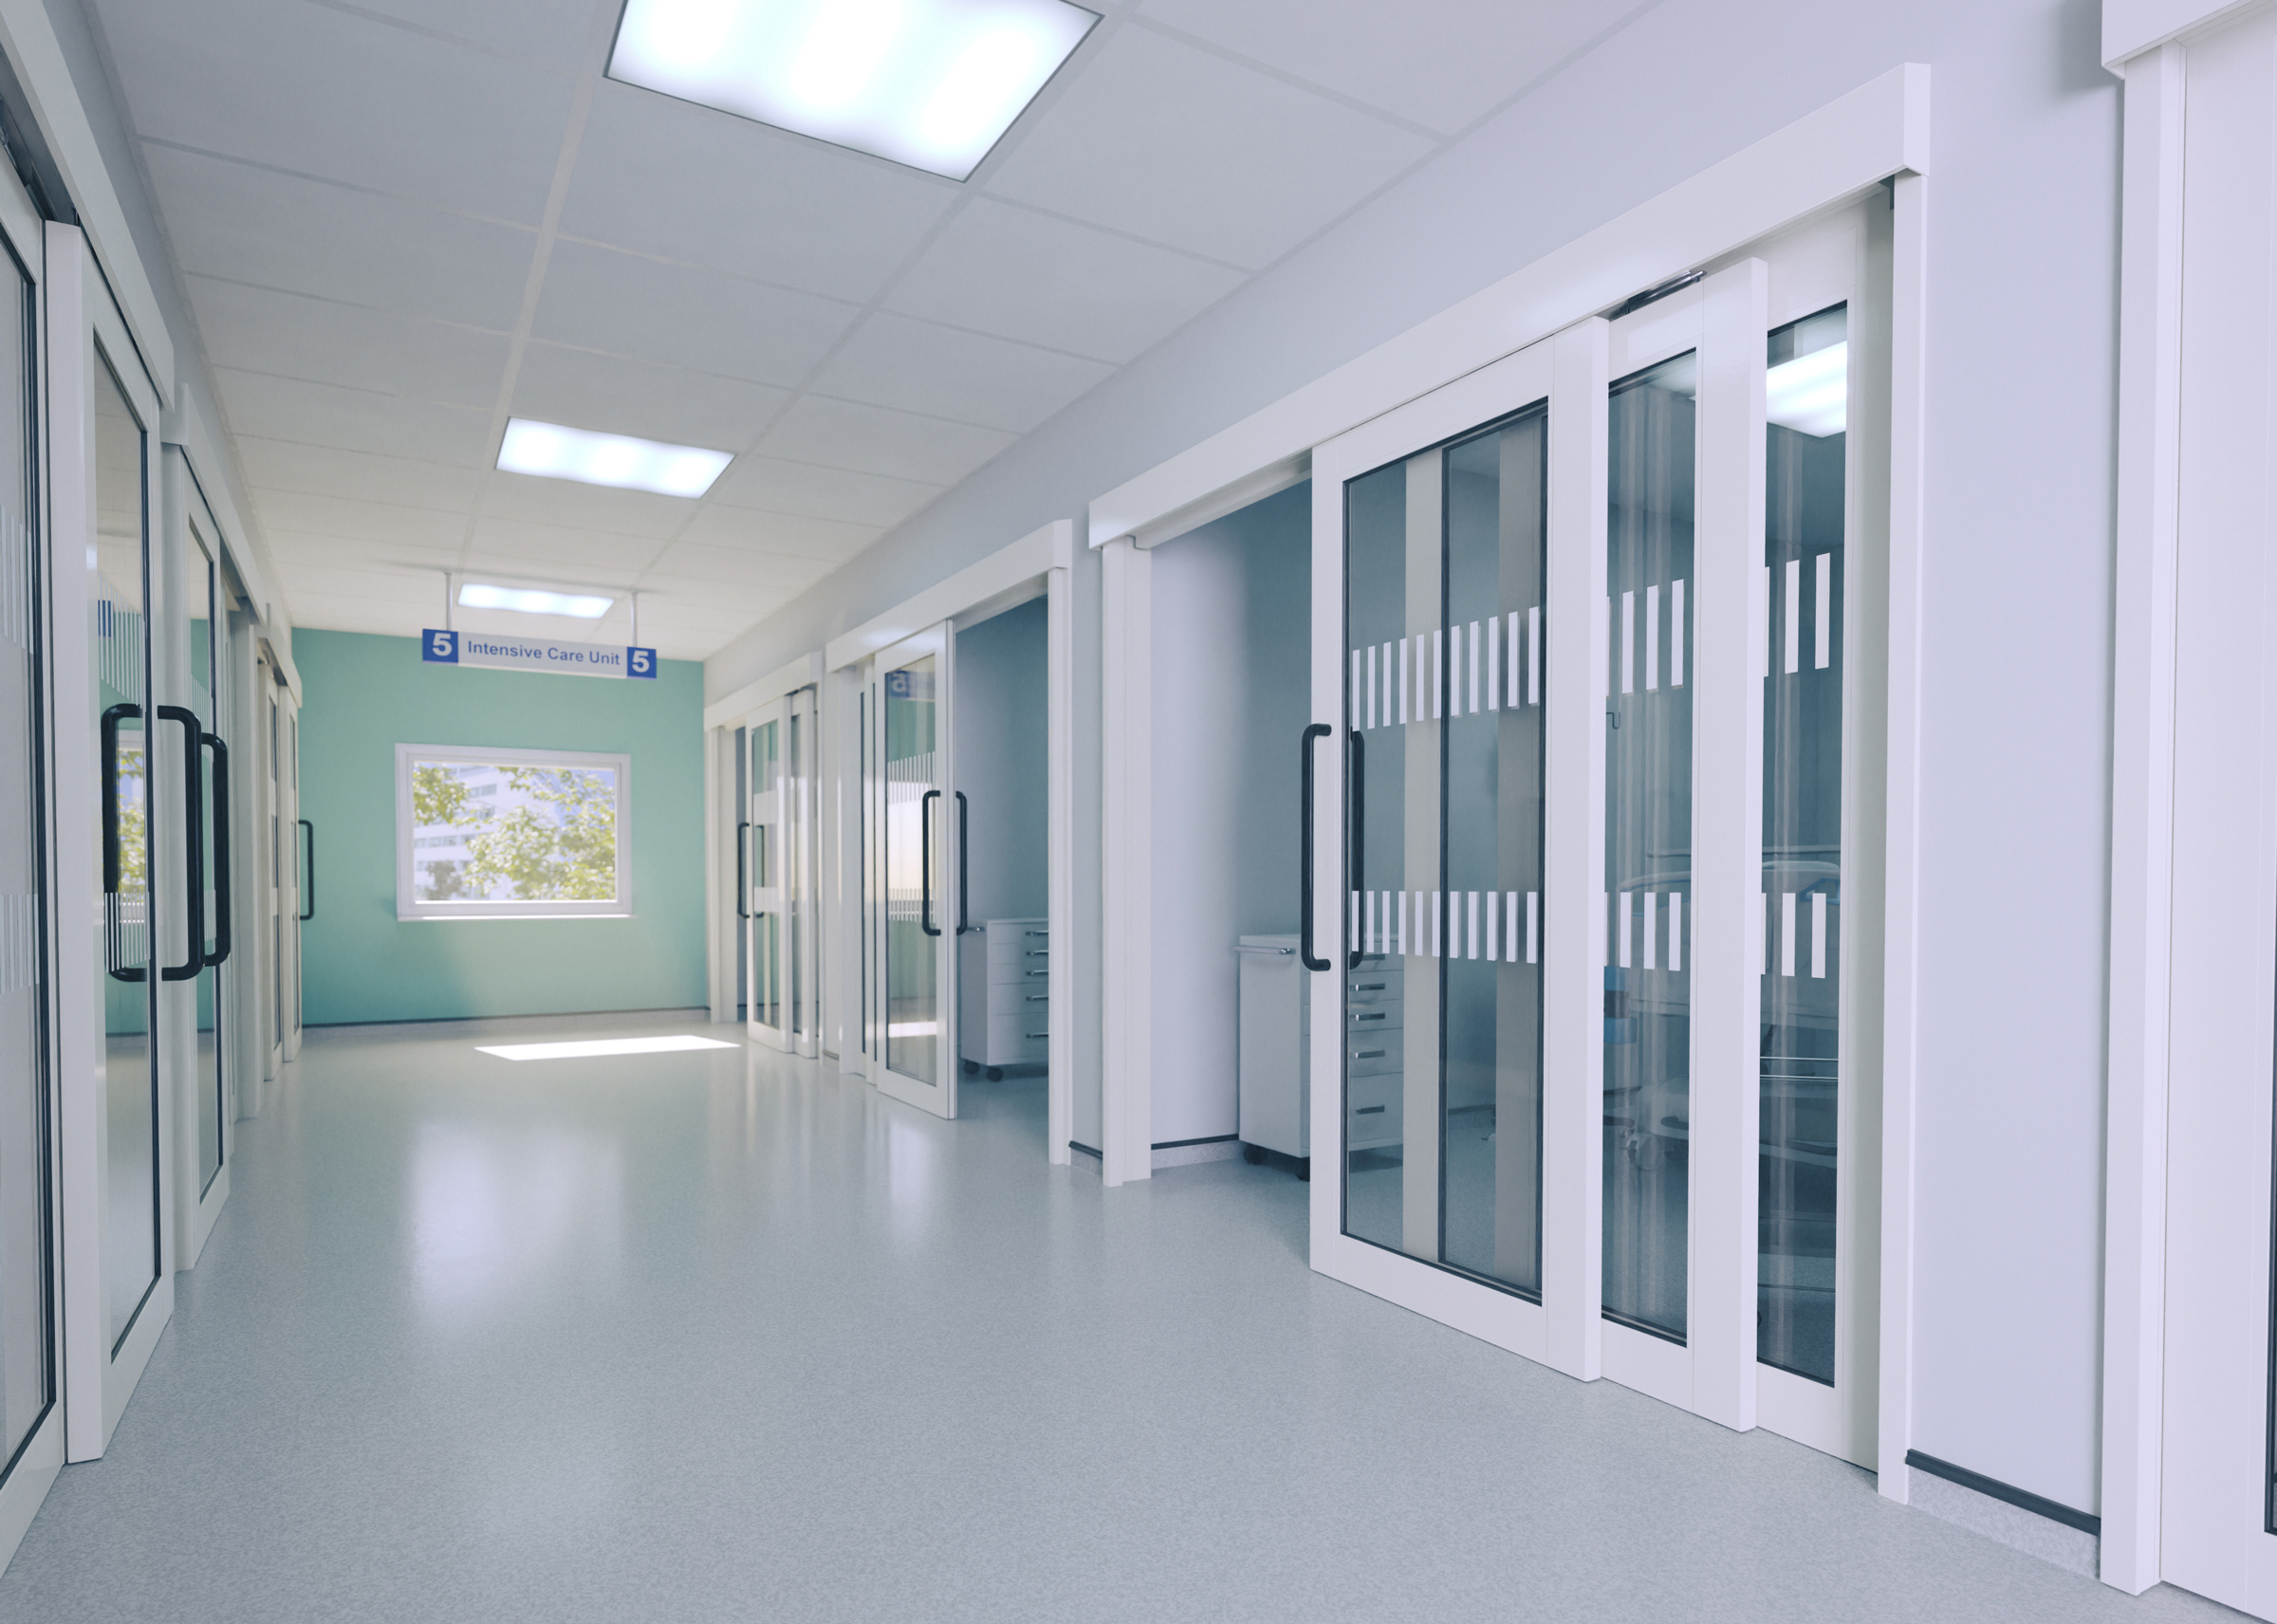 How Sliding Doors Facilitate Staff Well-Being in Healthcare Environments